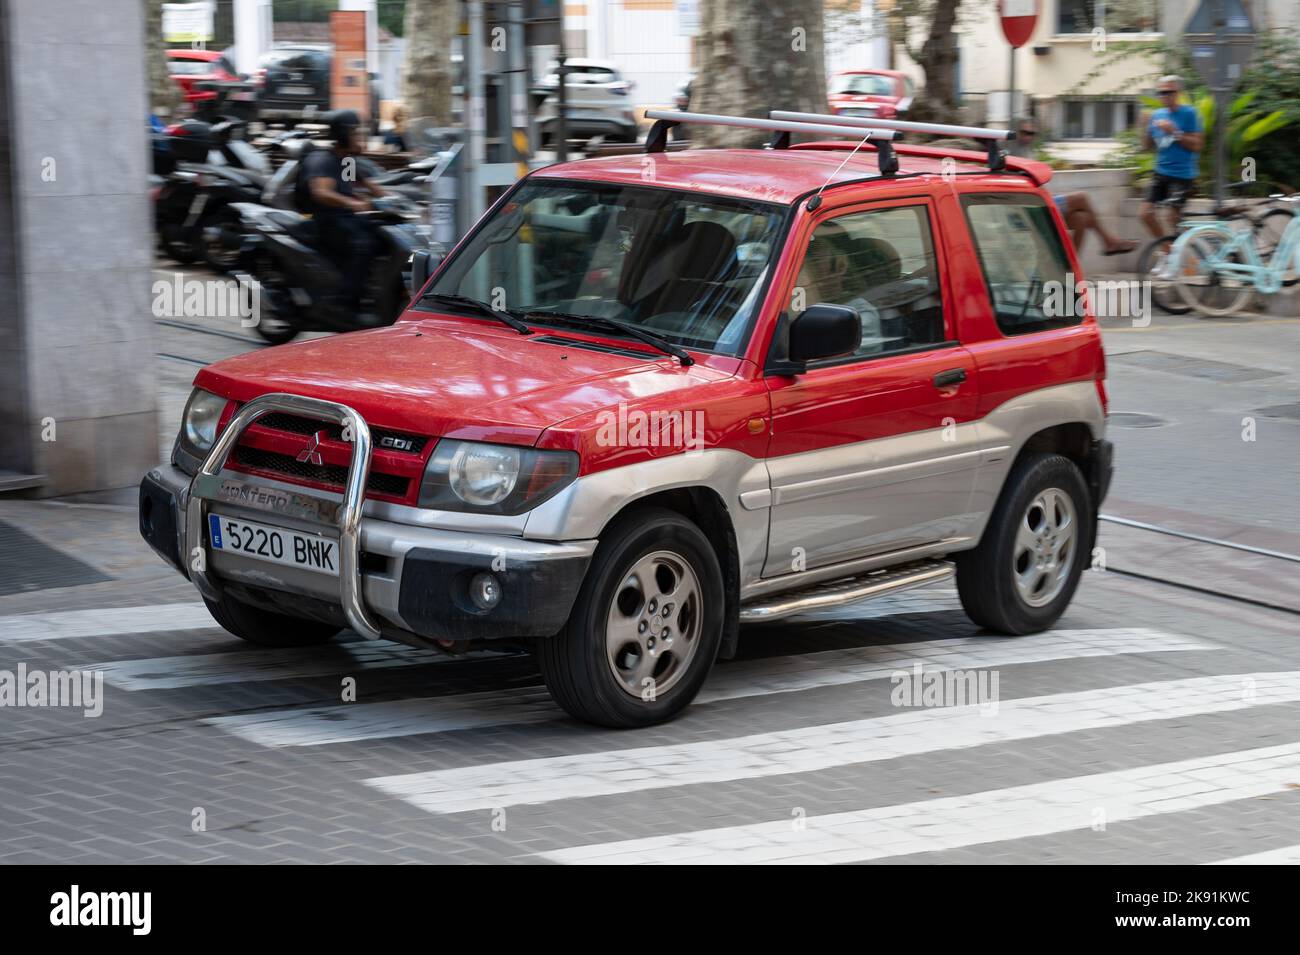 A red Mitsubishi Pajero Montero SUV with a tubular front bumper in Soller, Spain Stock Photo